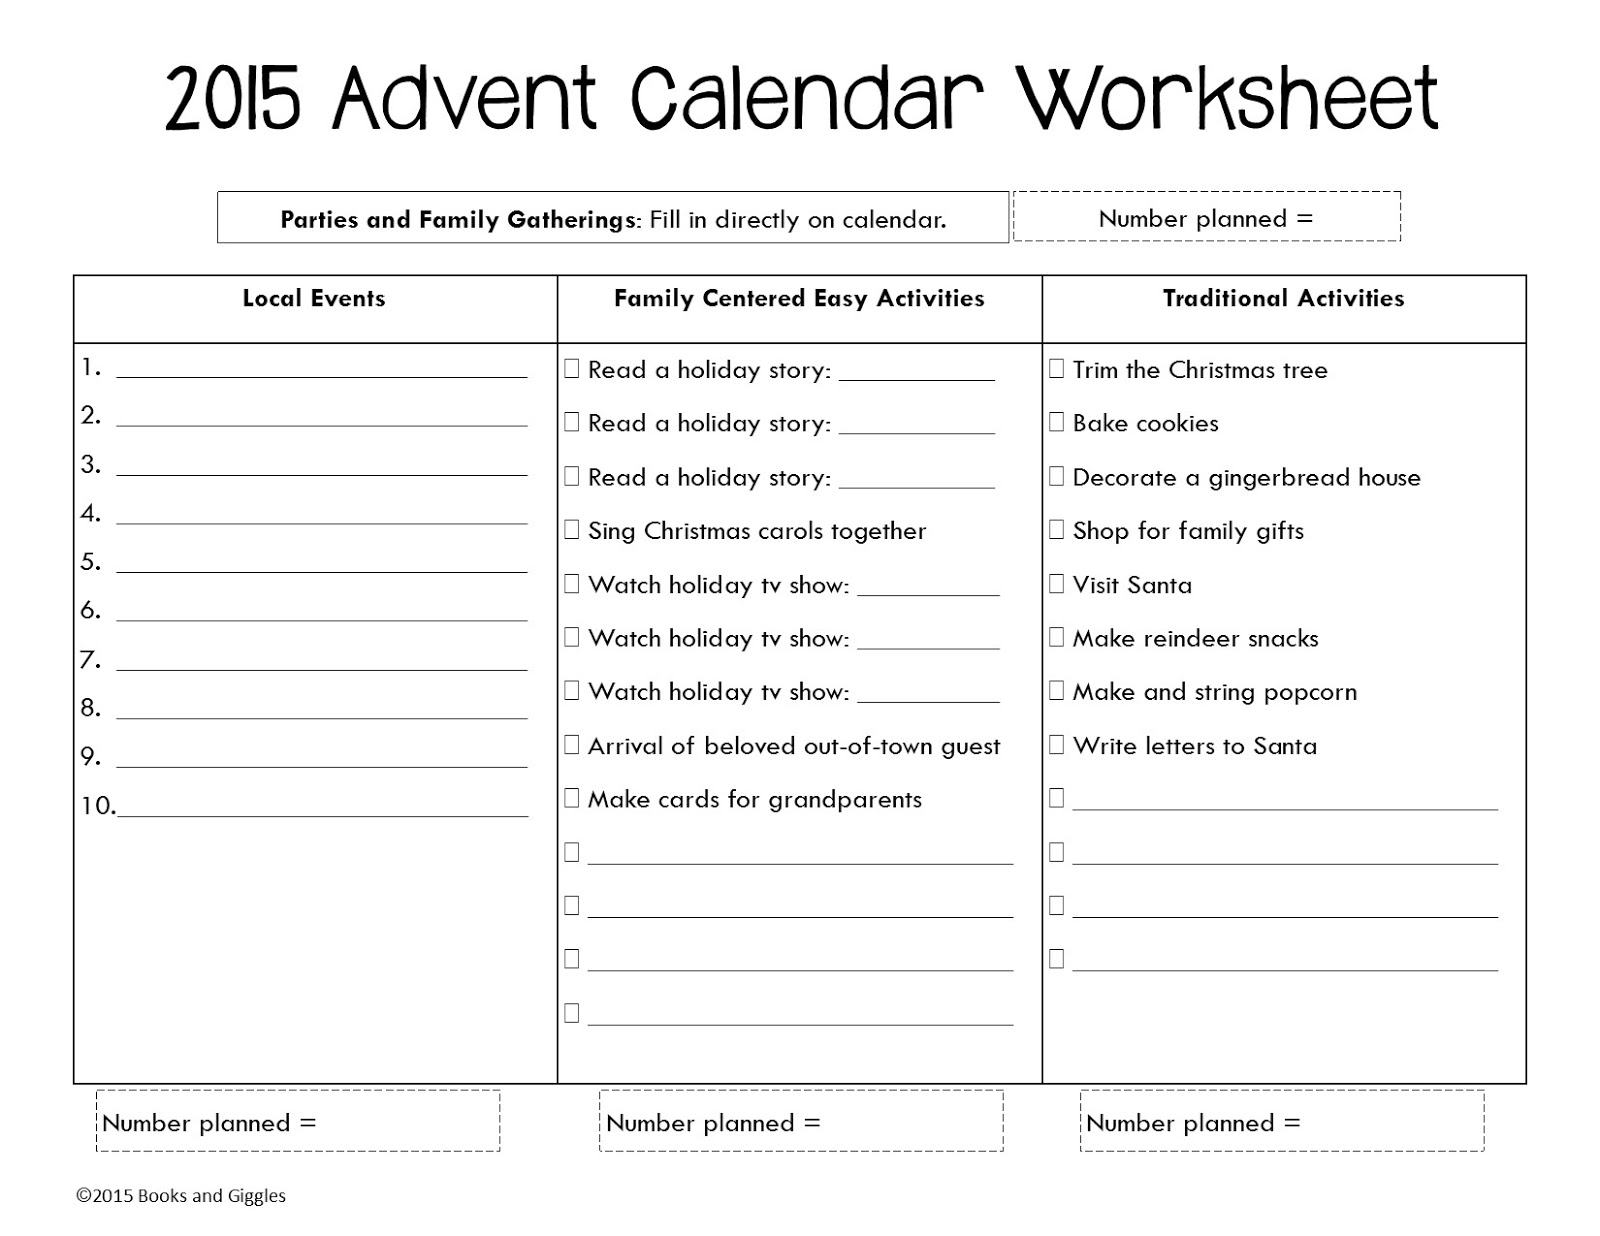 Advent Calendar Ideas Free Planning Worksheet for Families